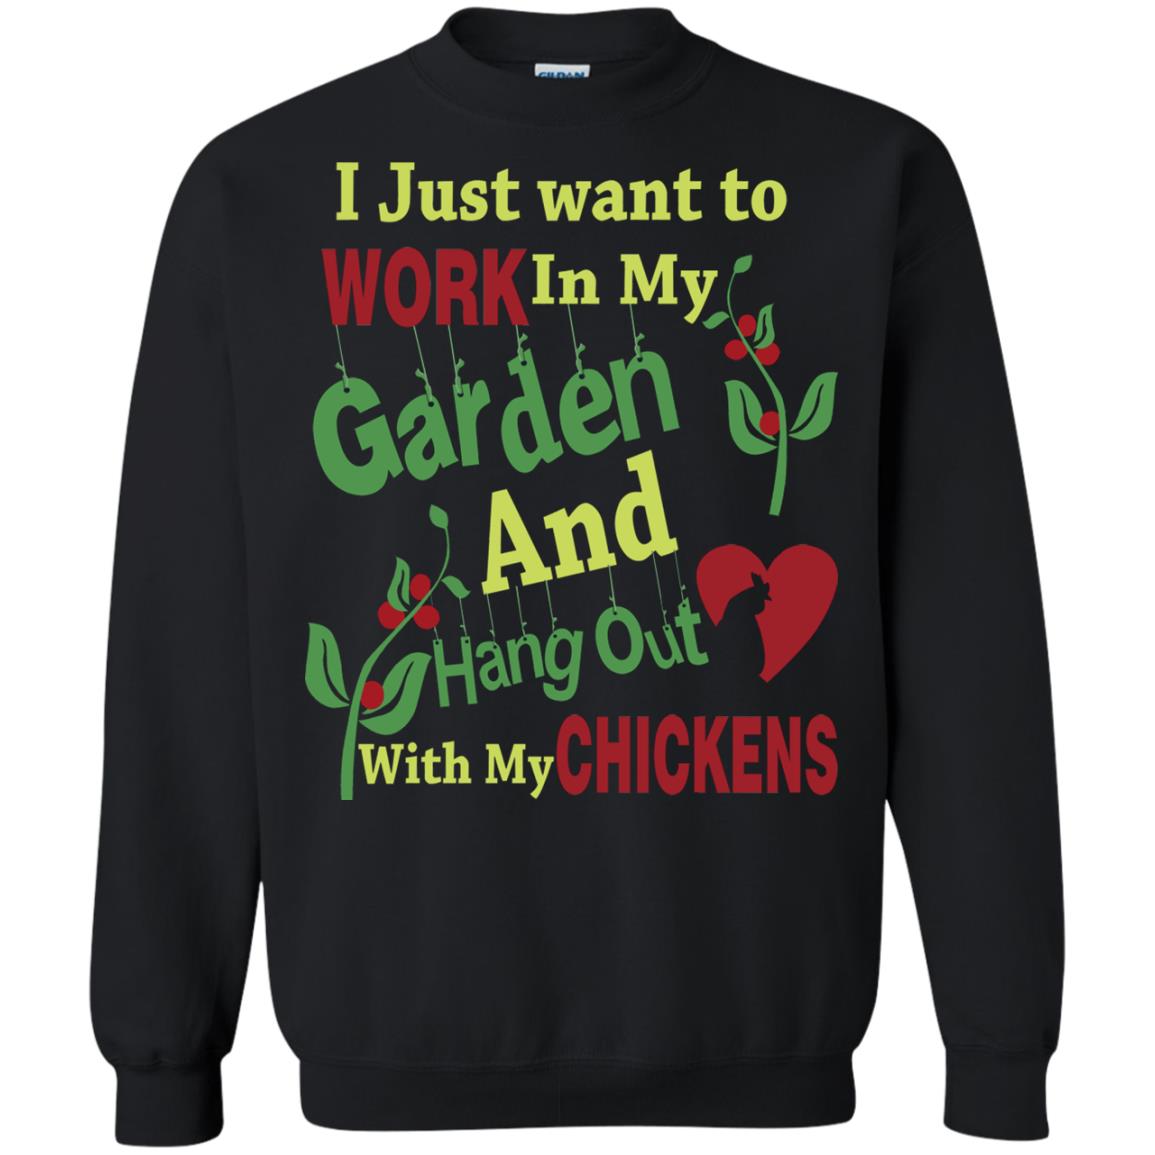 I Just Want To Work In My Garden And Hang Out With My Chickens Shirt